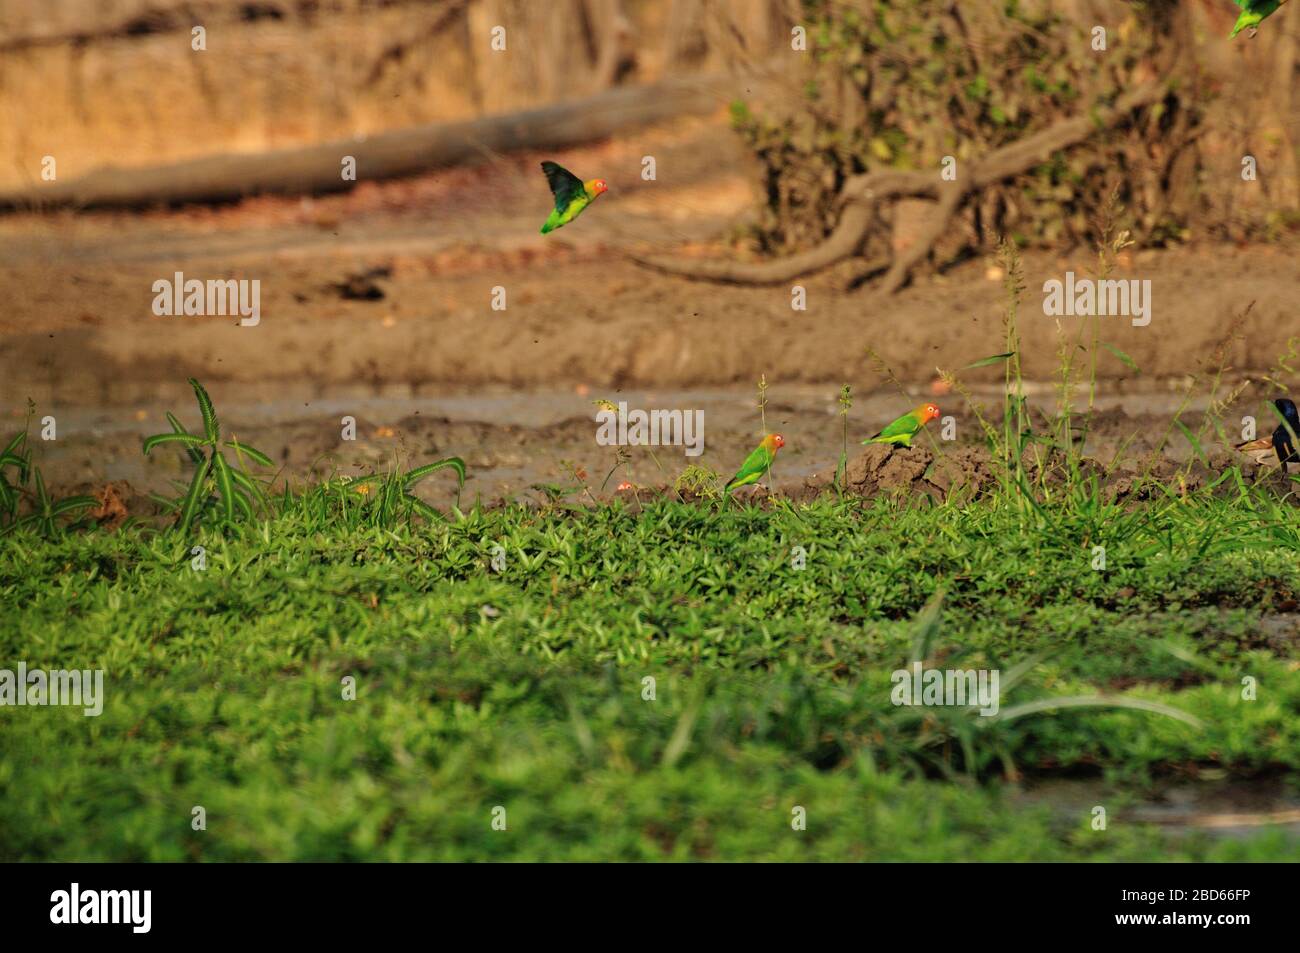 Wild Lilian's lovebirds at water hole in Africa Stock Photo